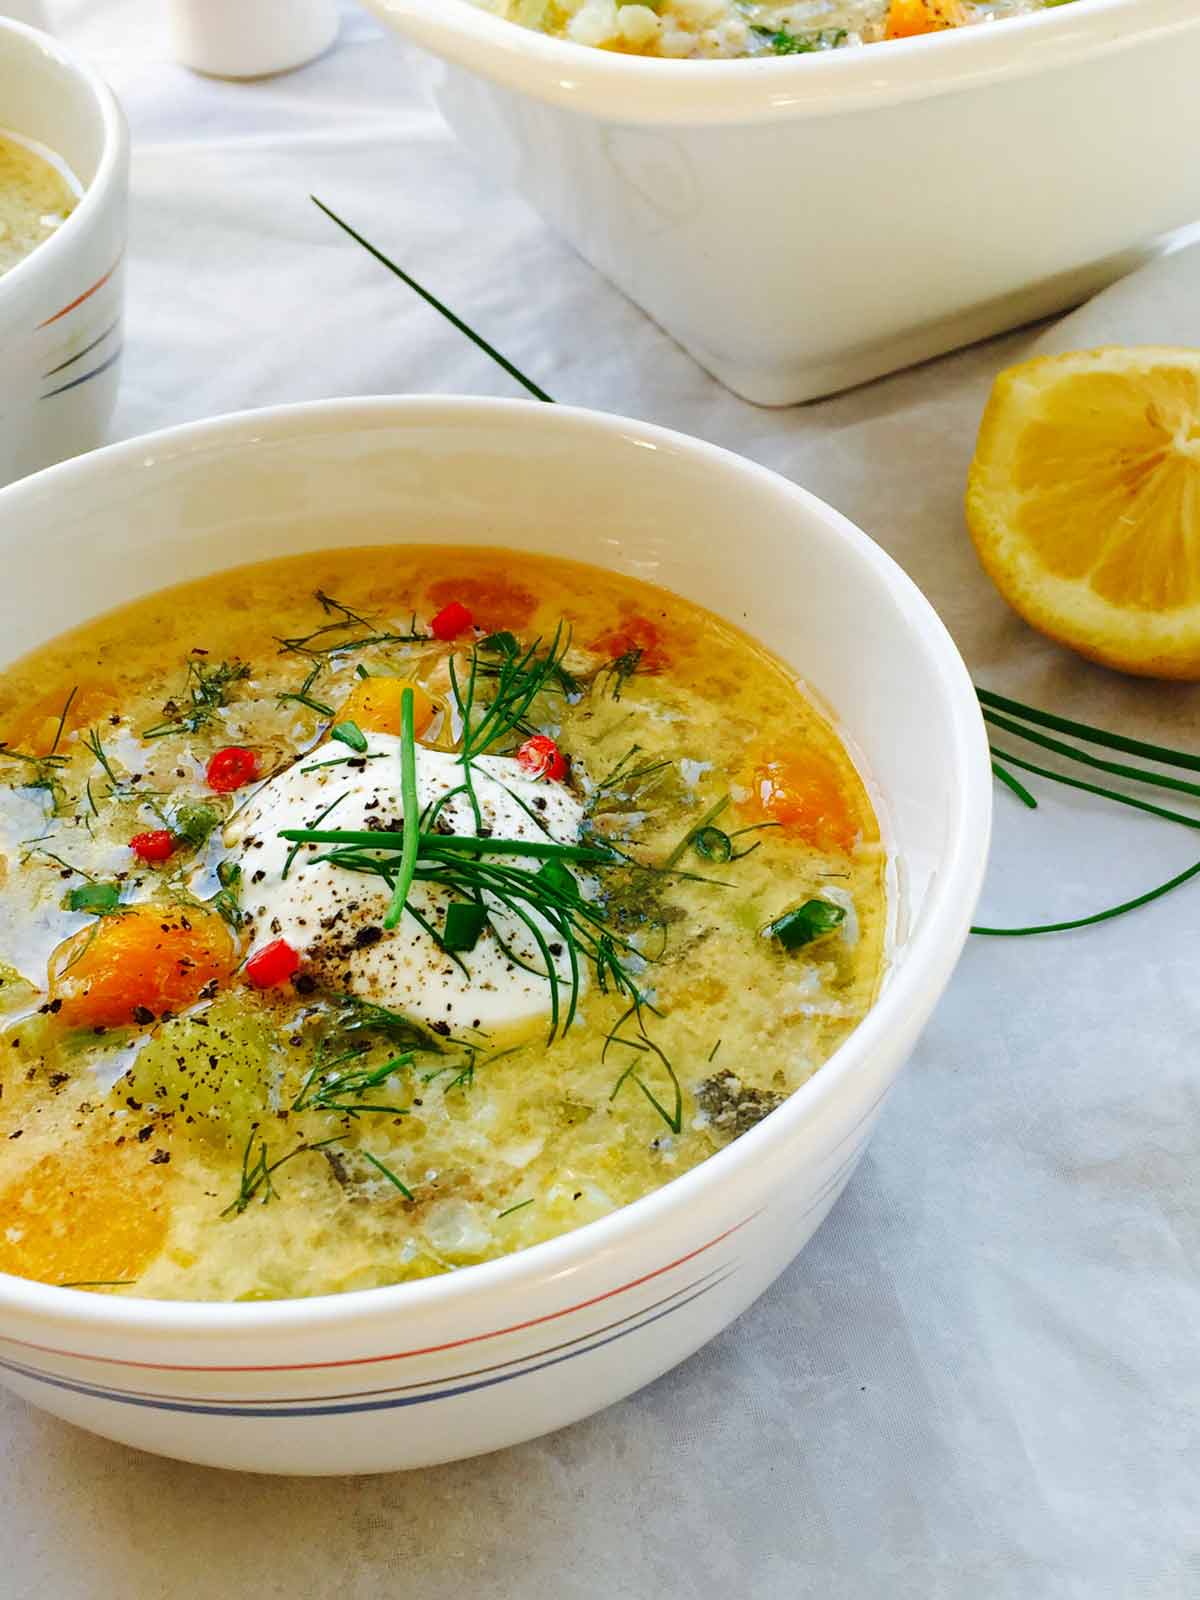 Yet another fish dish to enjoy, this delightful and creamy fish soup (or fish chowder) will leave you craving for more.